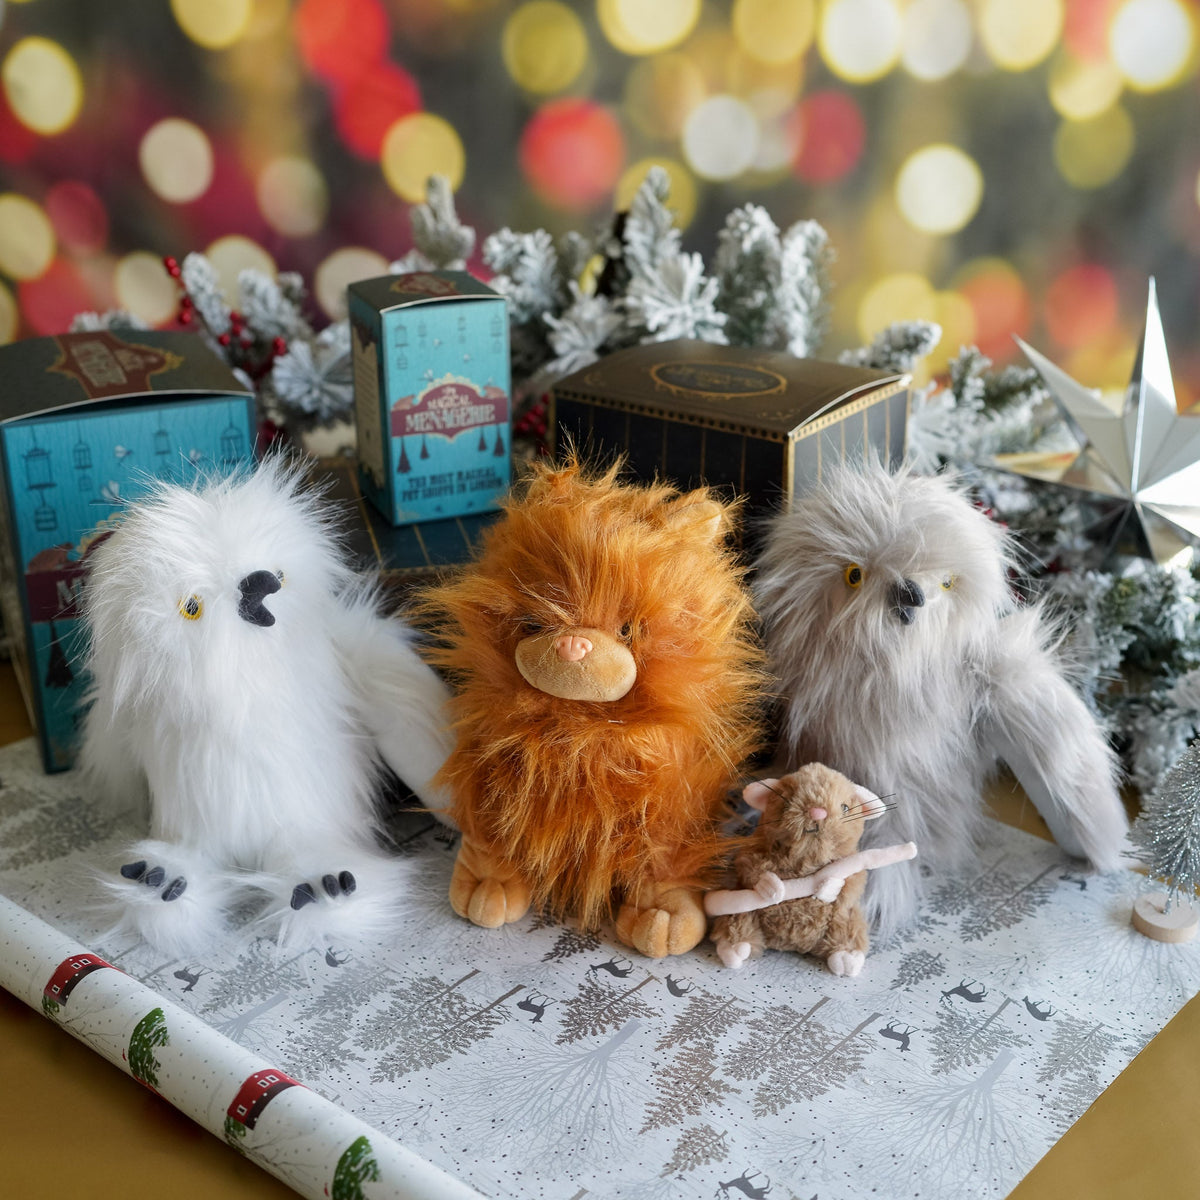 Adopt a Magical White Owl Plush from LitJoy Crate | Collectibles &amp; Gifts for Booklovers